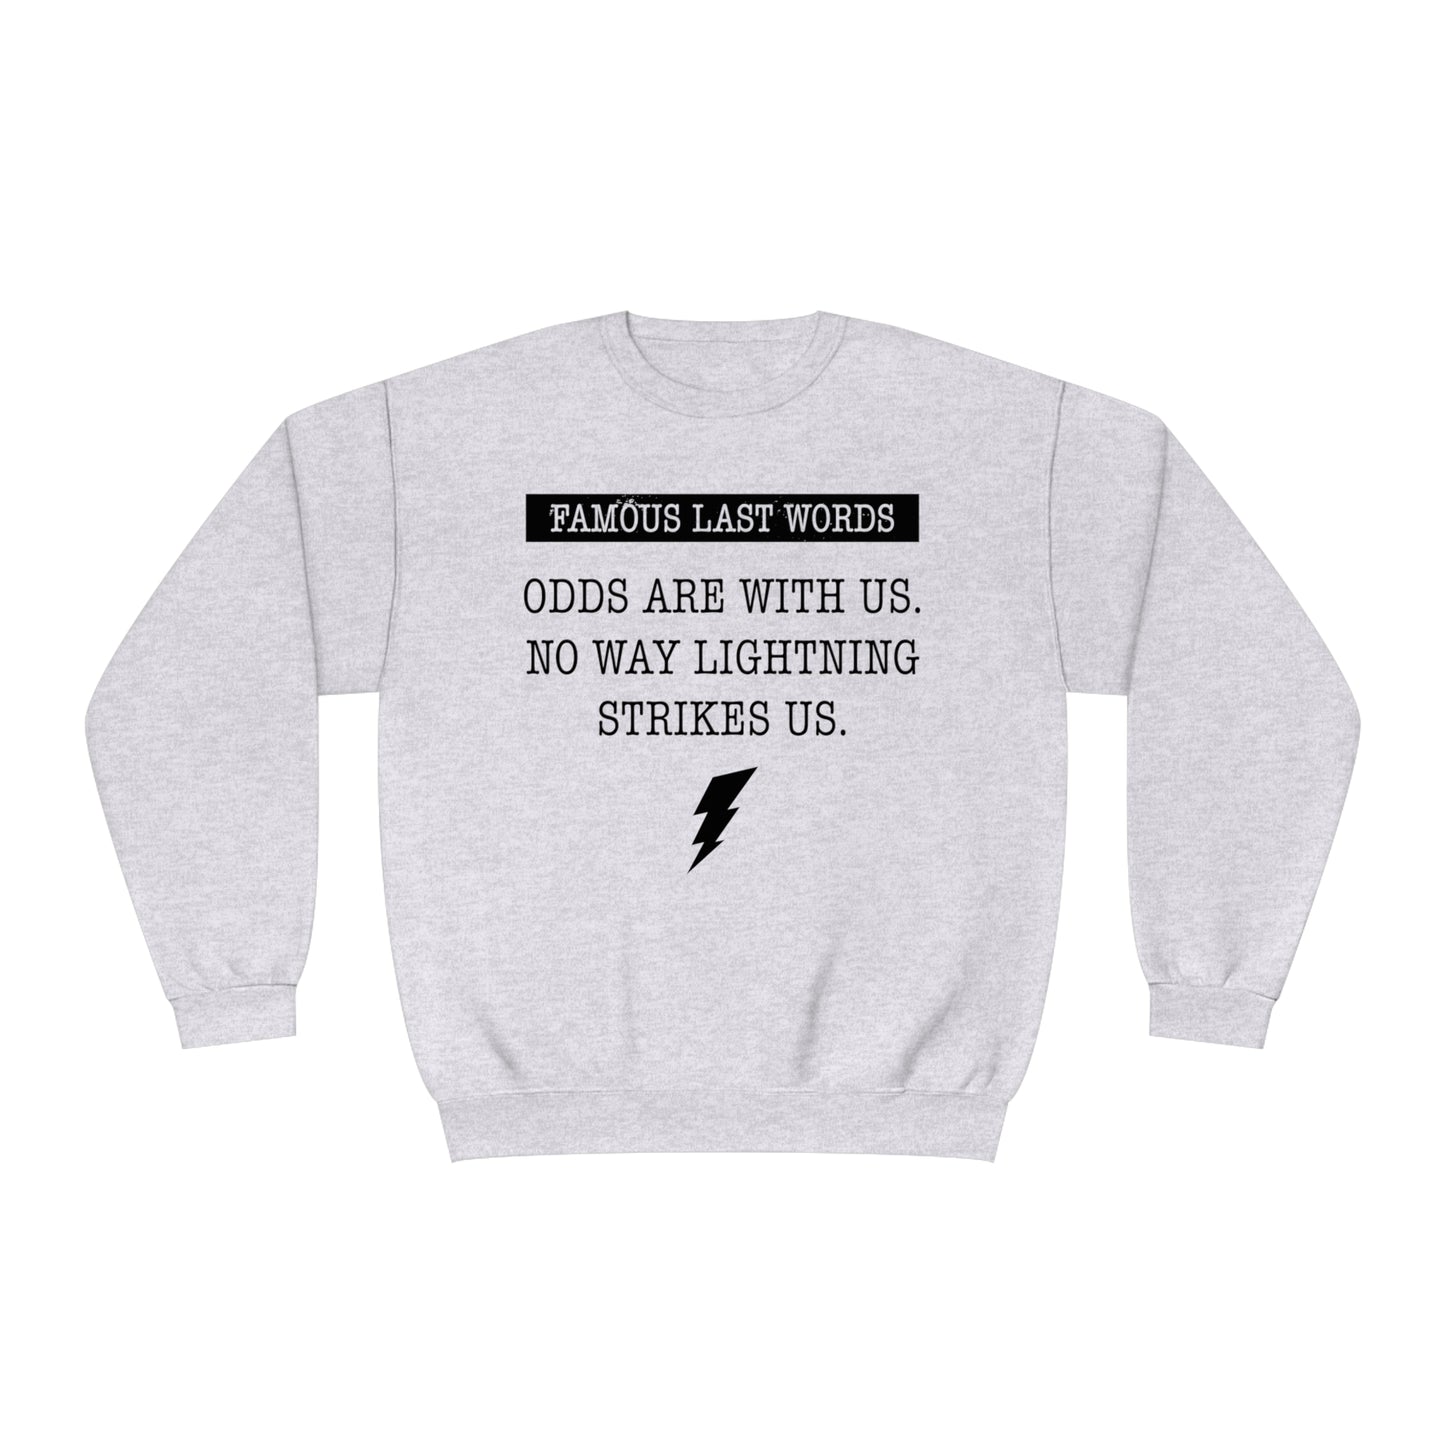 FML "Odds Are With Us" Sweatshirt